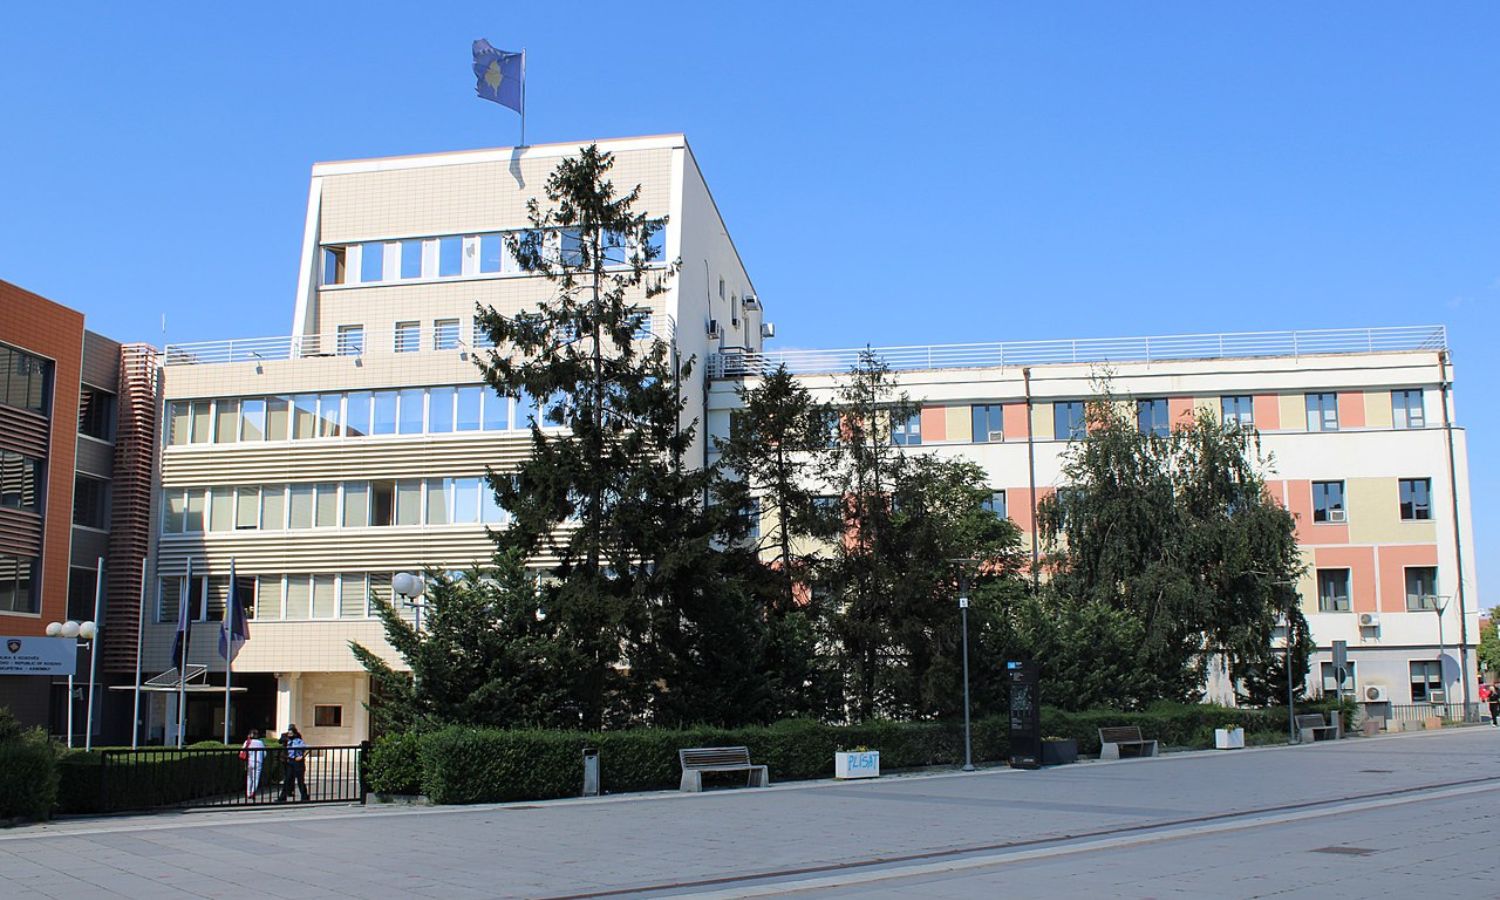 Kosovo’s National Assembly Unanimously Adopts IHRA Working Definition of Antisemitism